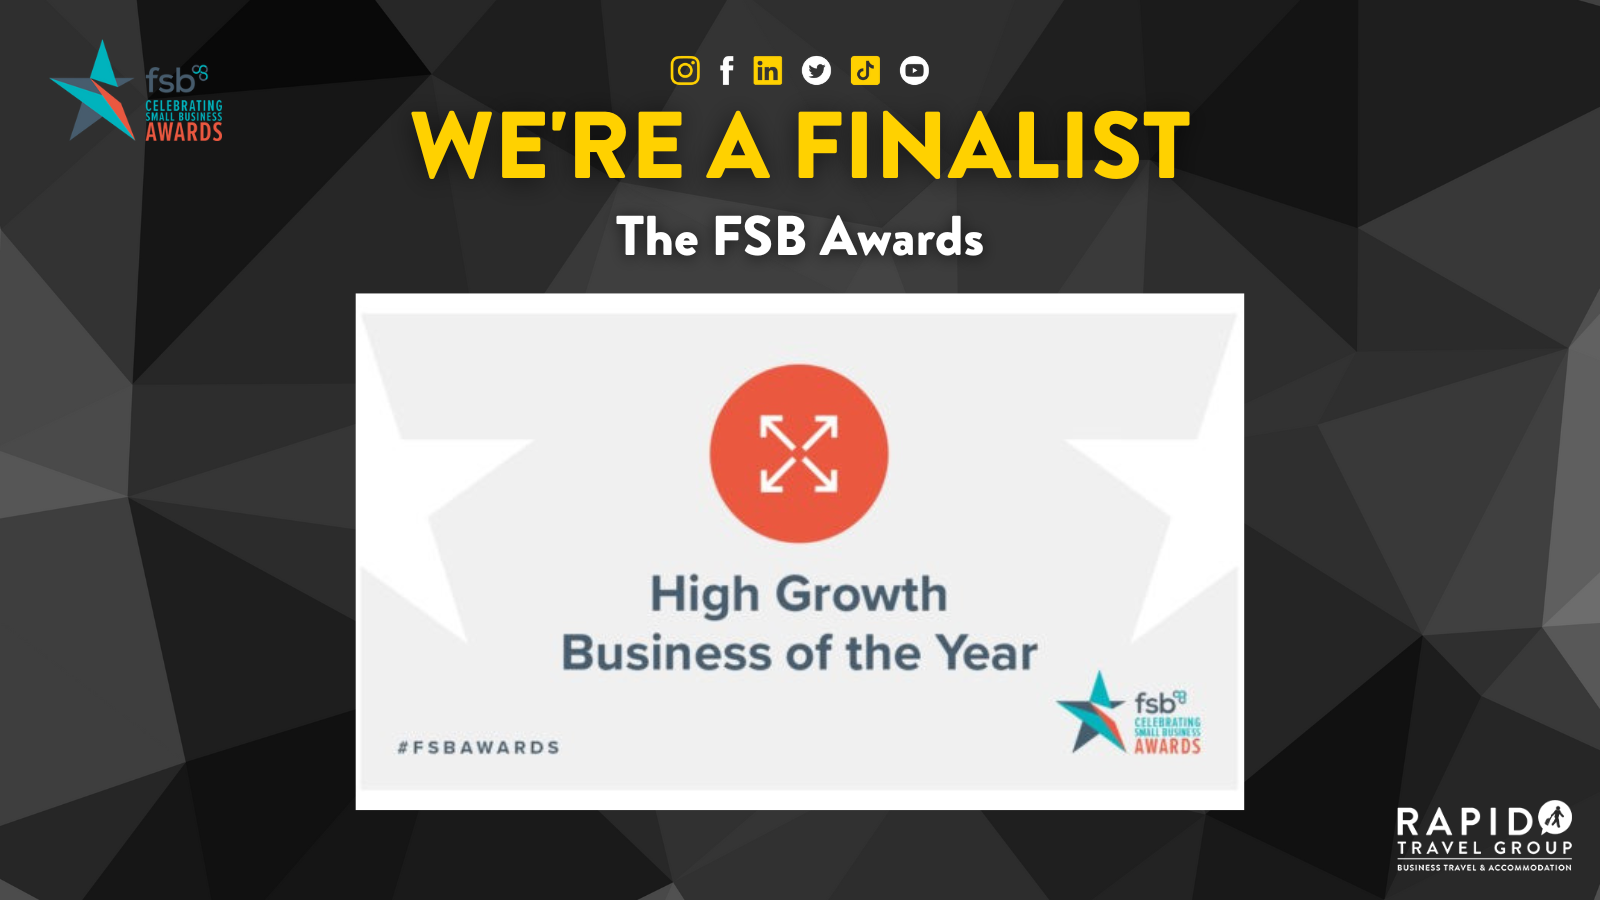 We're a Finalist - High Growth Business of the Year at the FSB Awards